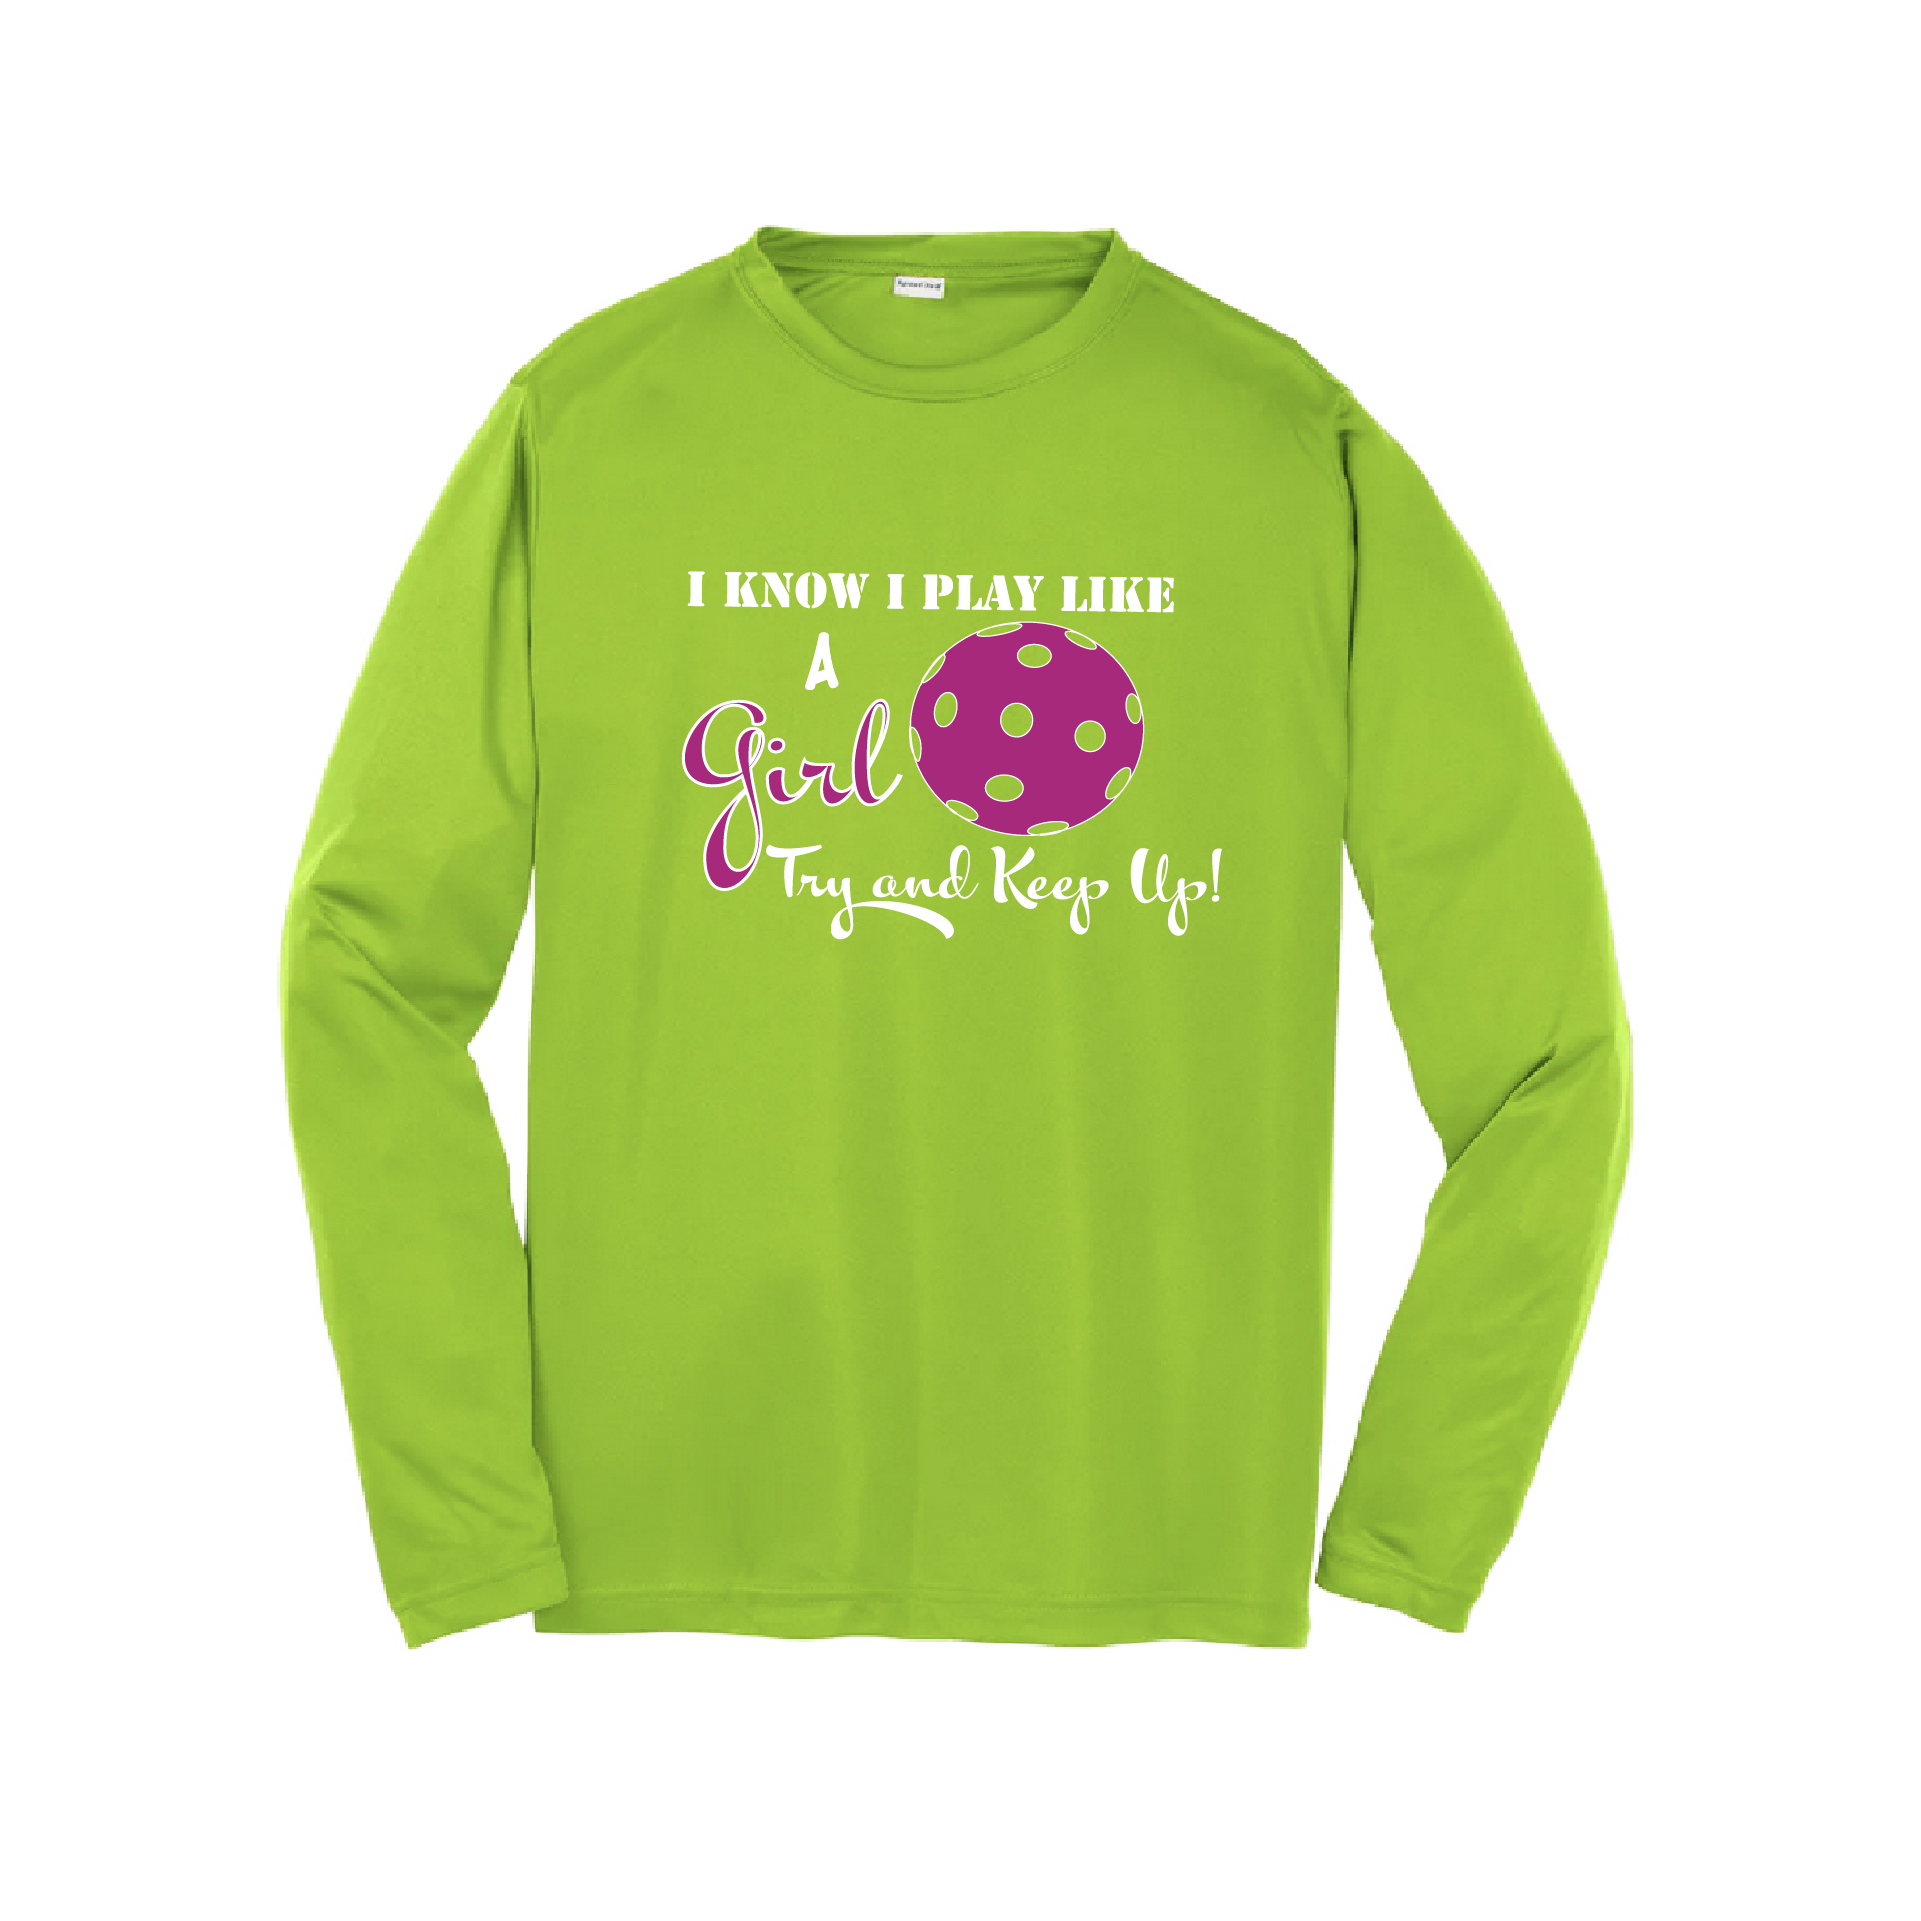 Design: I Know I Play Like a Girl, Try to Keep Up -  Youth Style: Long Sleeve  Shirts are lightweight, roomy and highly breathable. These moisture-wicking shirts are designed for athletic performance. They feature PosiCharge technology to lock in color and prevent logos from fading. Removable tag and set-in sleeves for comfort.